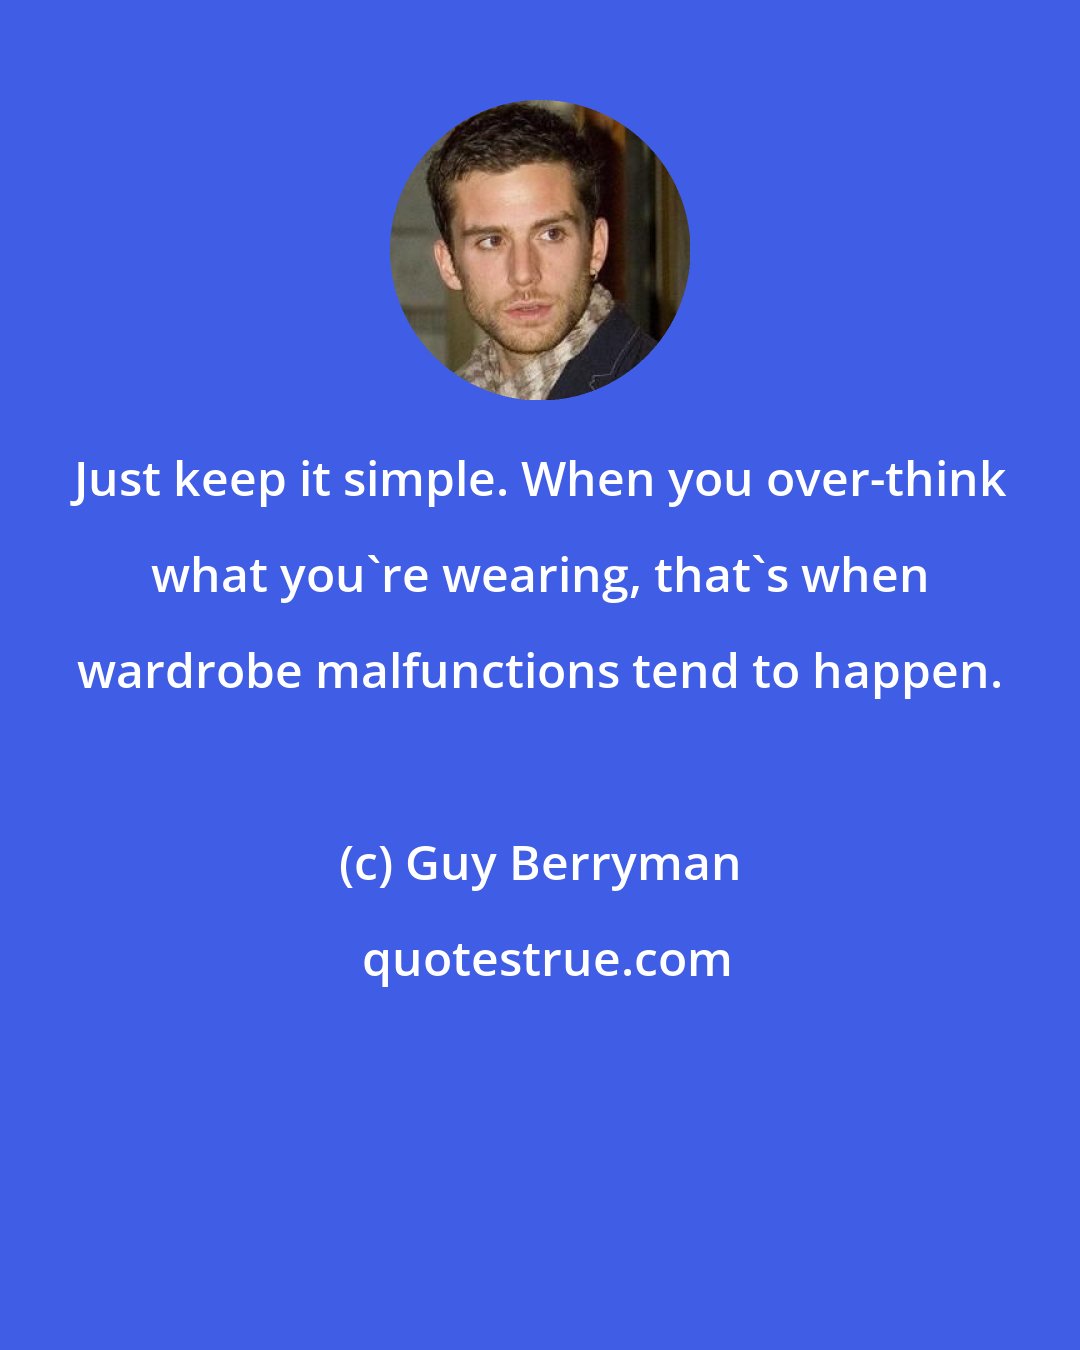 Guy Berryman: Just keep it simple. When you over-think what you're wearing, that's when wardrobe malfunctions tend to happen.